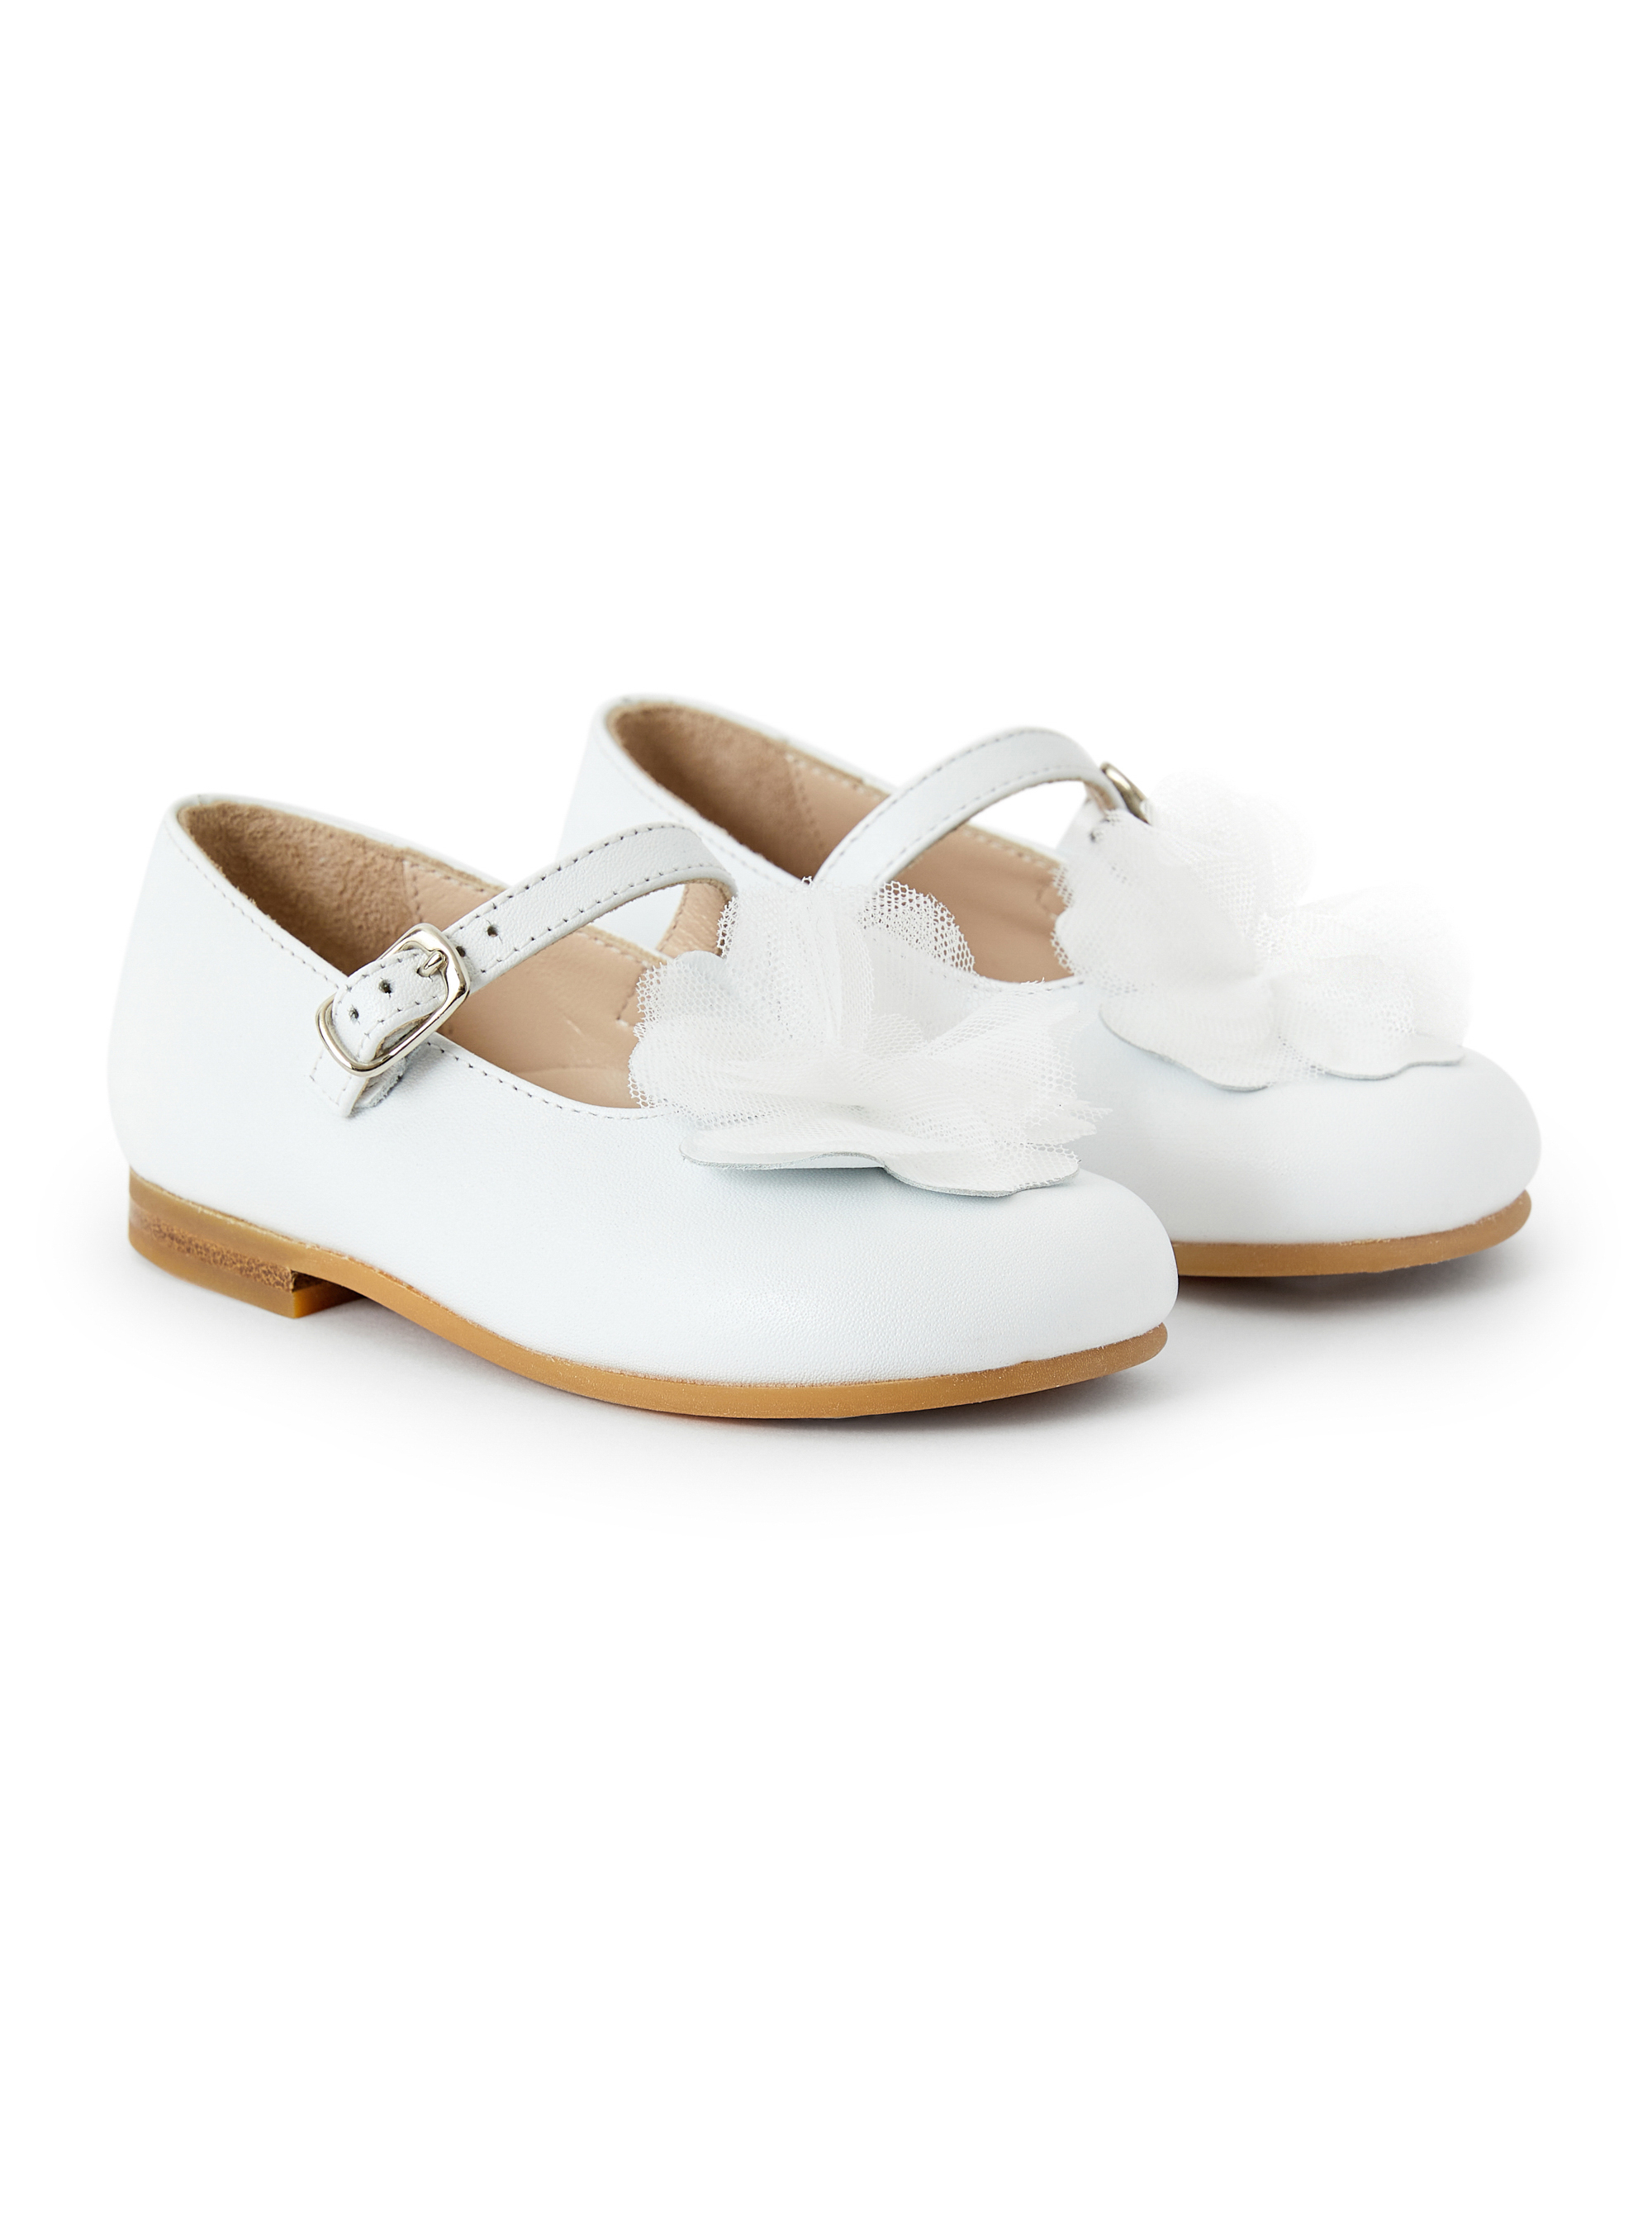 Chaussures plates blanches avec tulle - Chaussures - Il Gufo